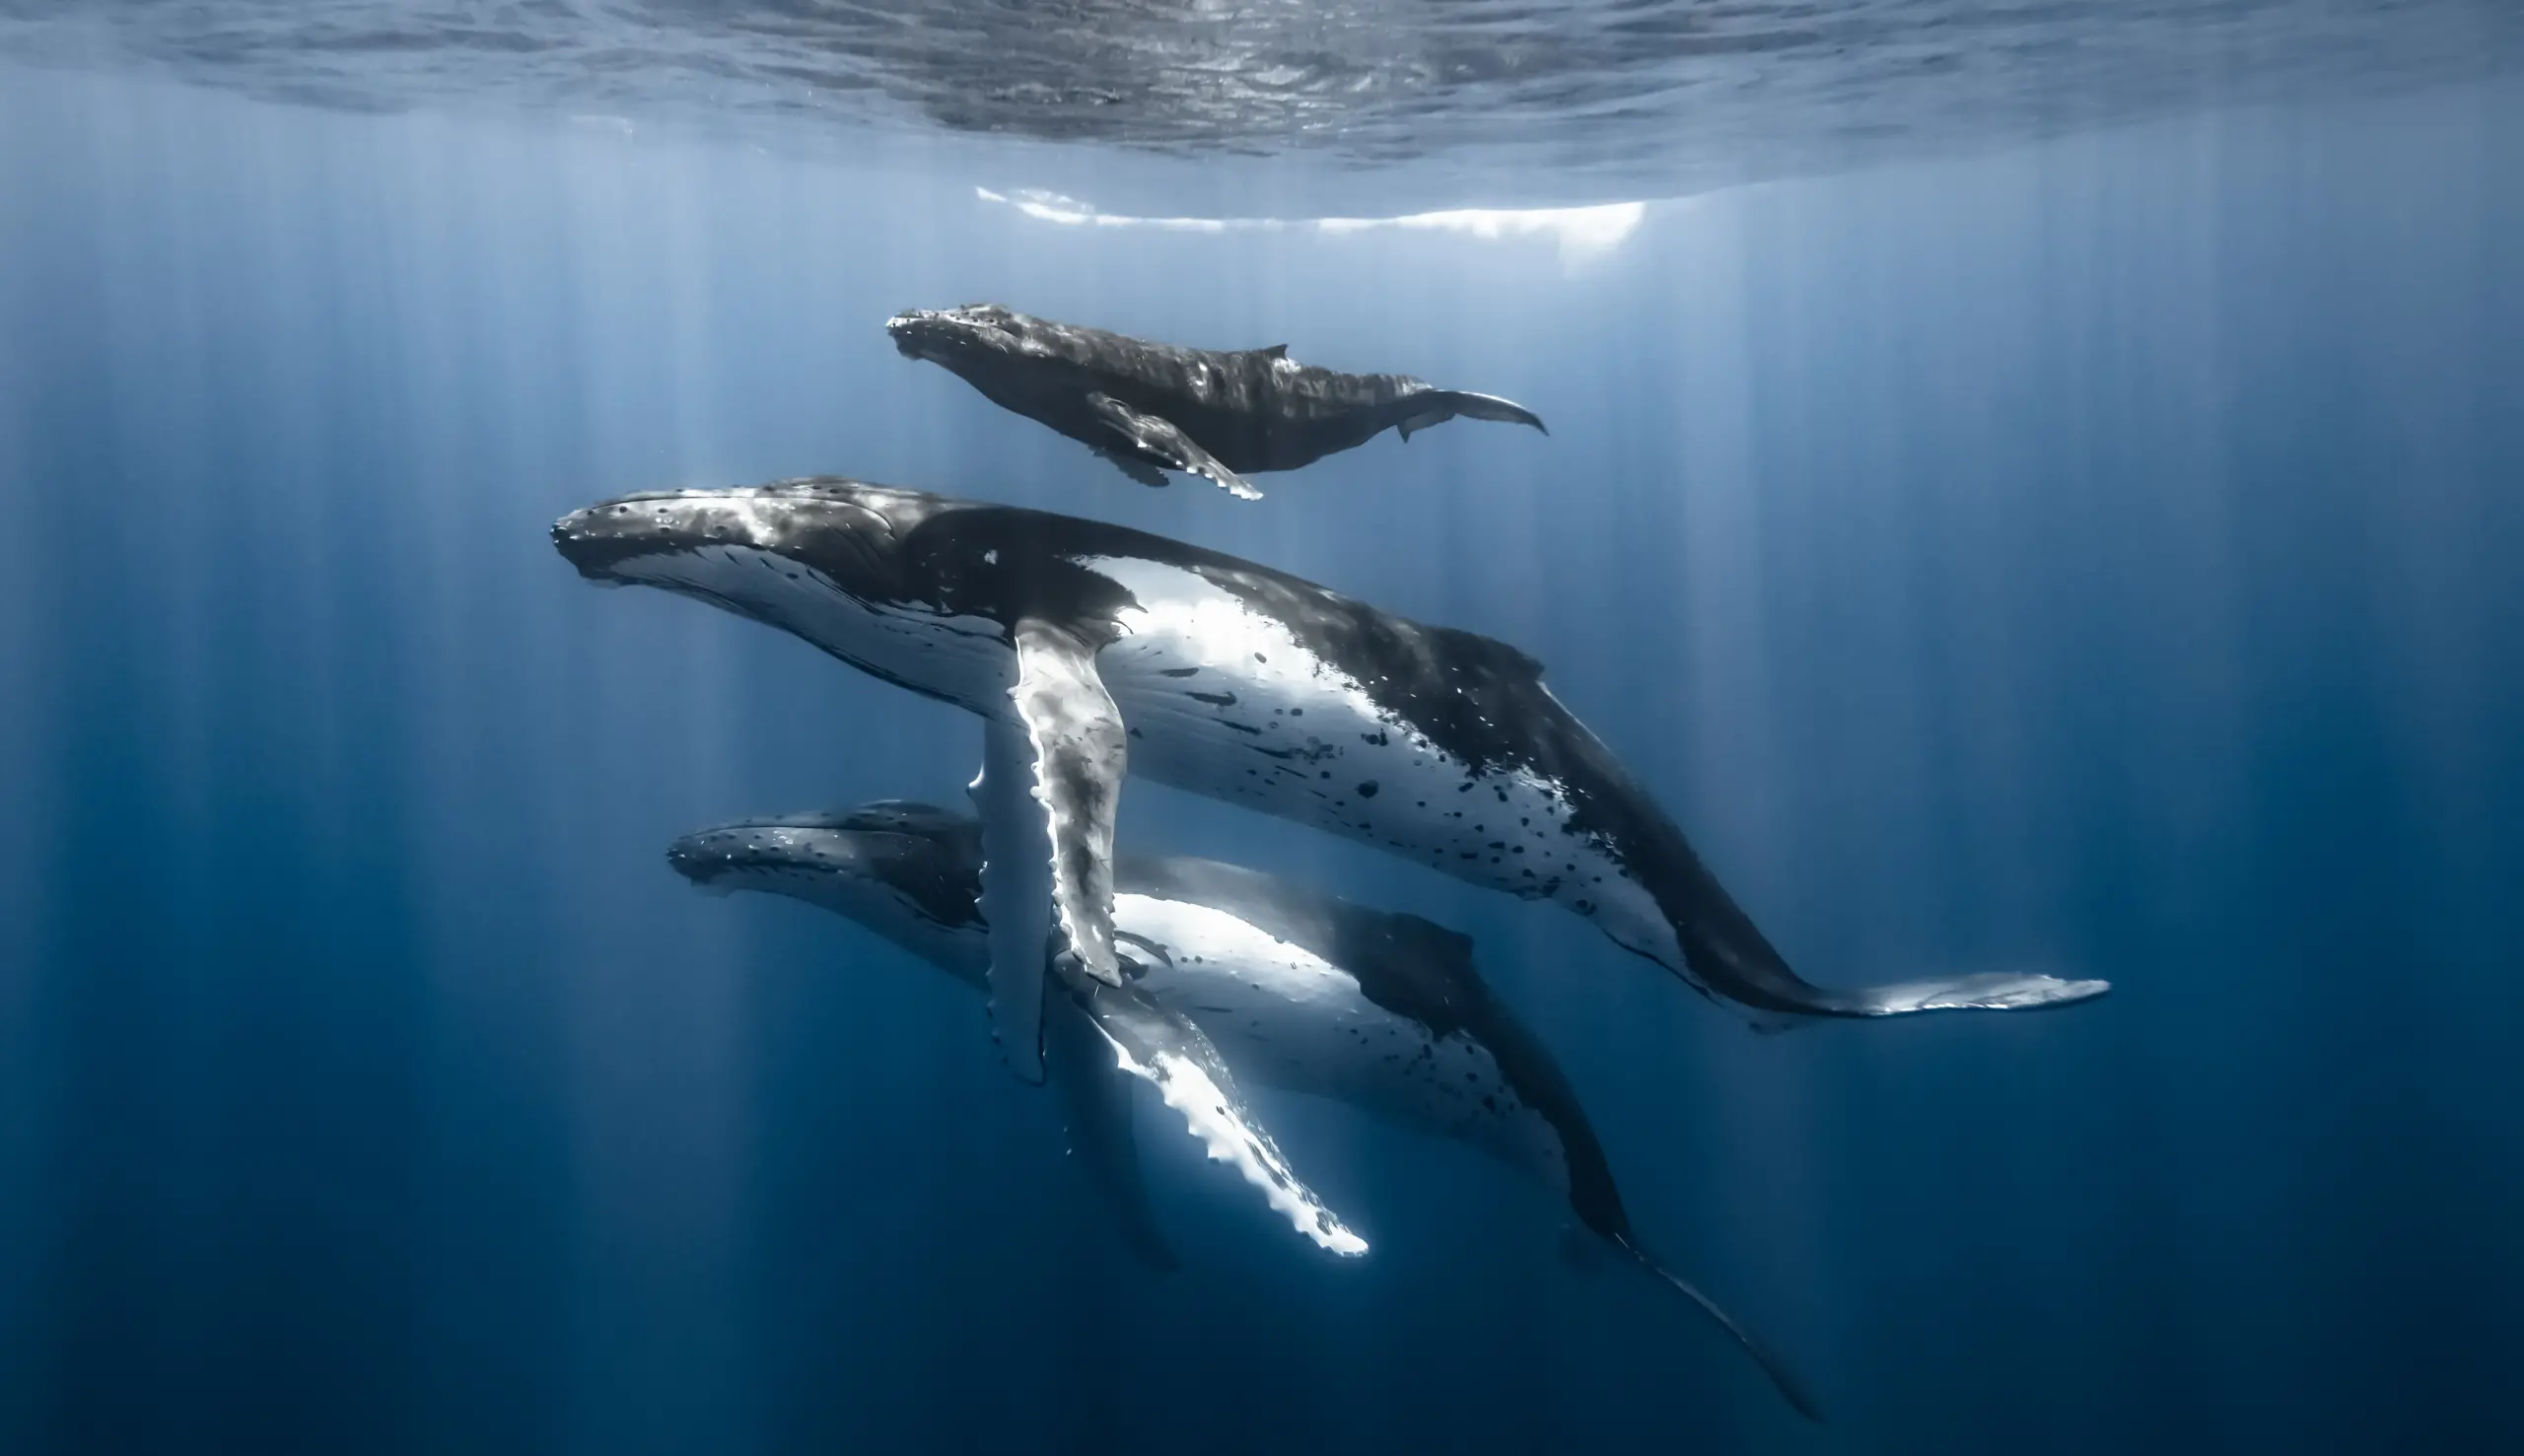 3 generations of humpback whales glide gracefully just beneath the blue ocean's surface. Beams of sunlight shine down on them through the waves breaking above.